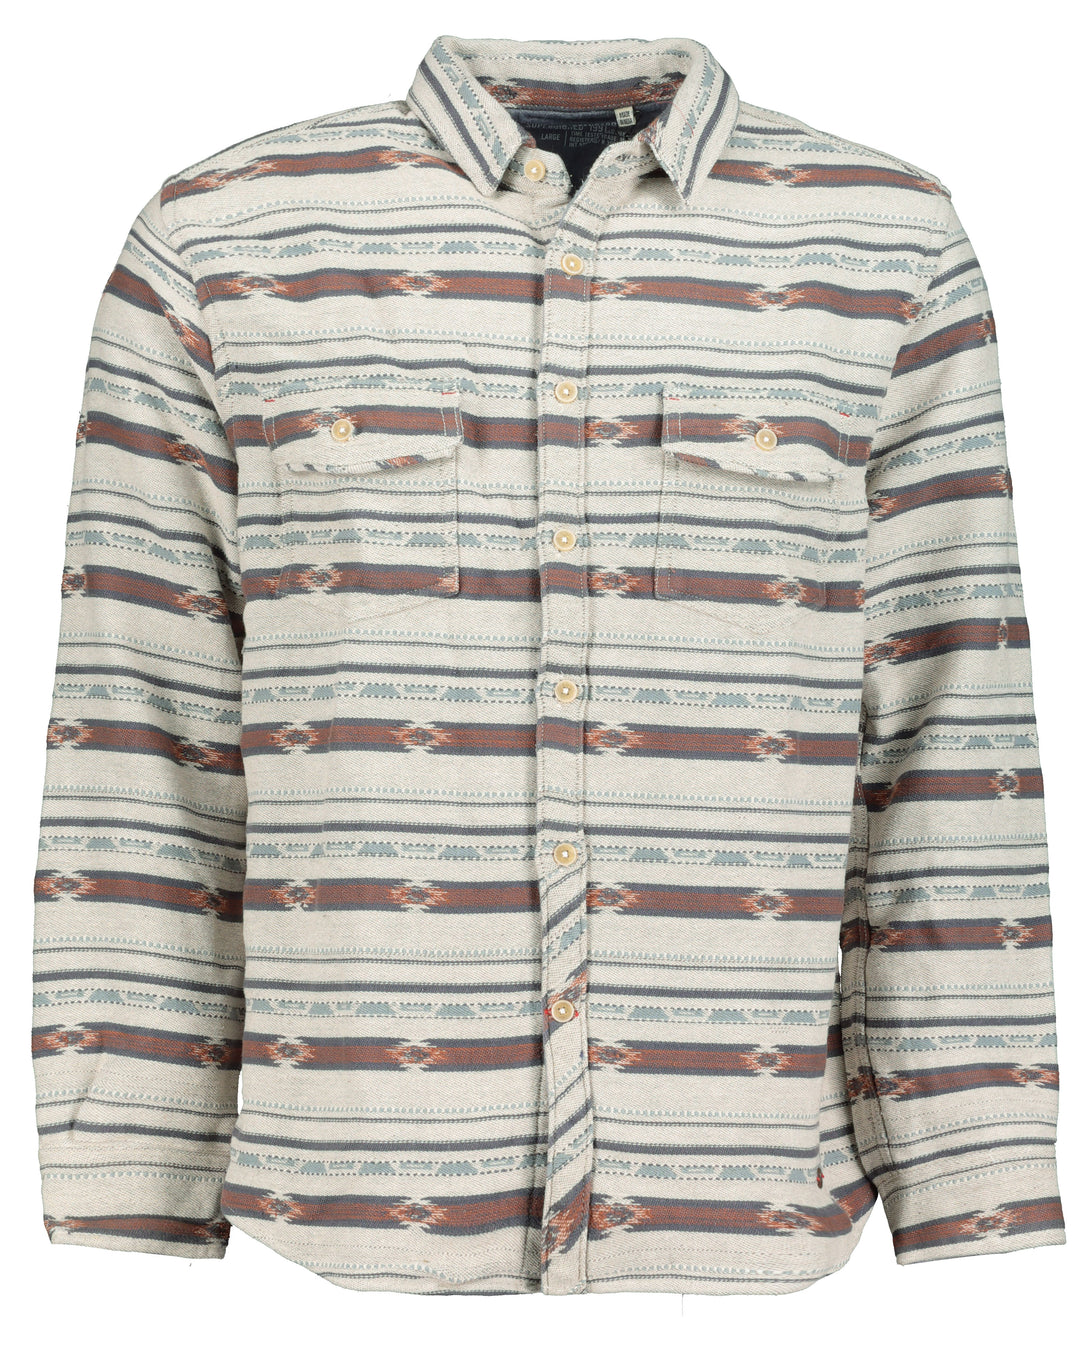 GREY RIO LONG SLEEVE SHIRT - Kingfisher Road - Online Boutique